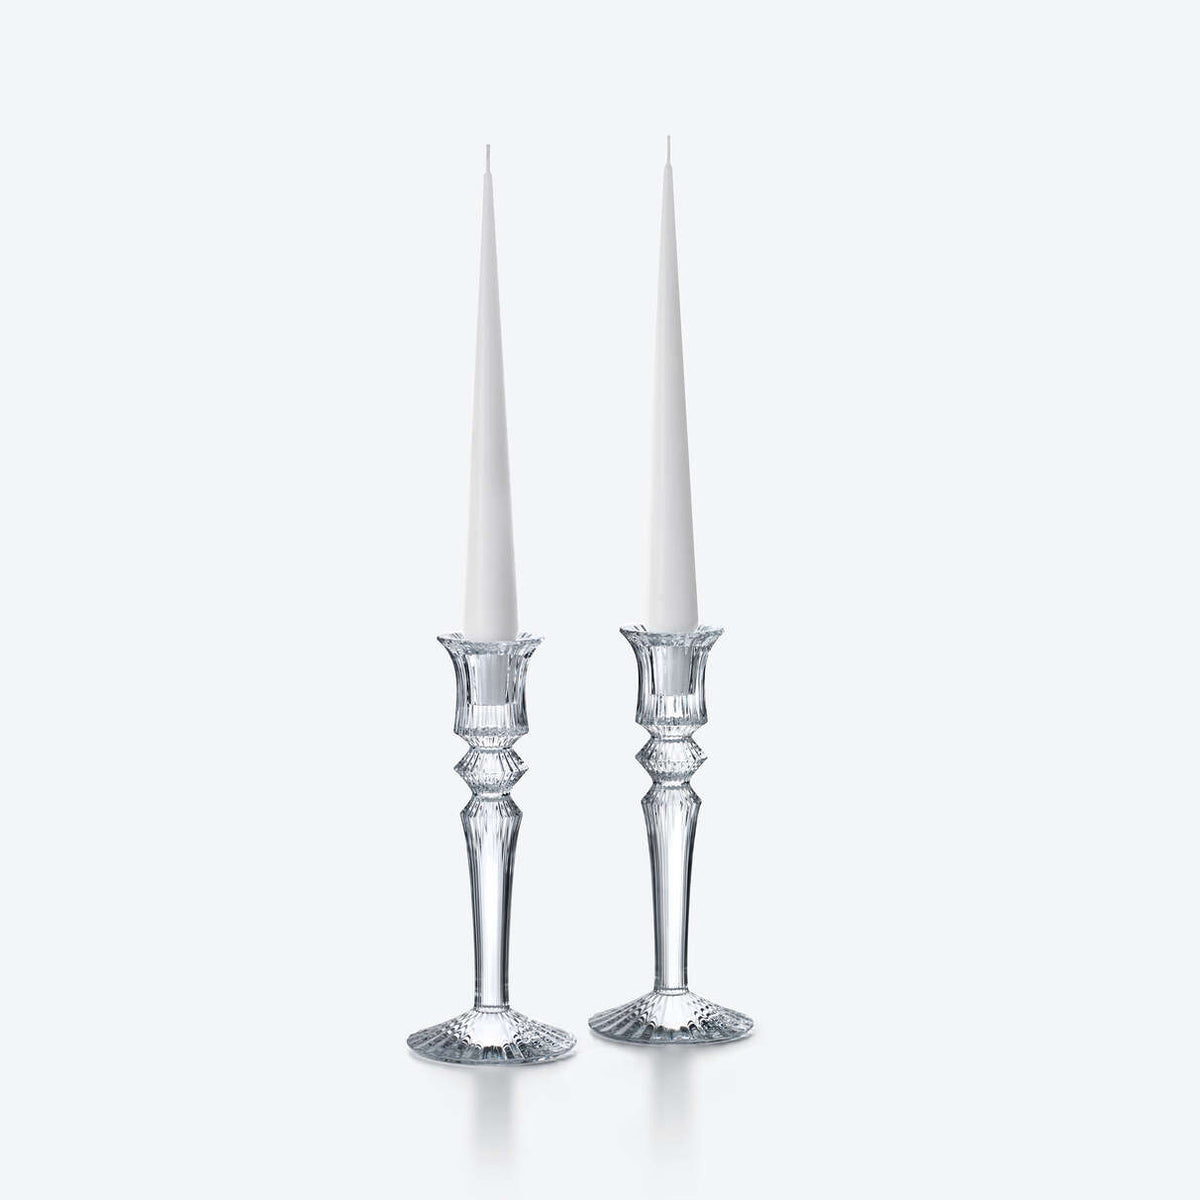 Mille Nuits Candleholders, Set of 2 (D)